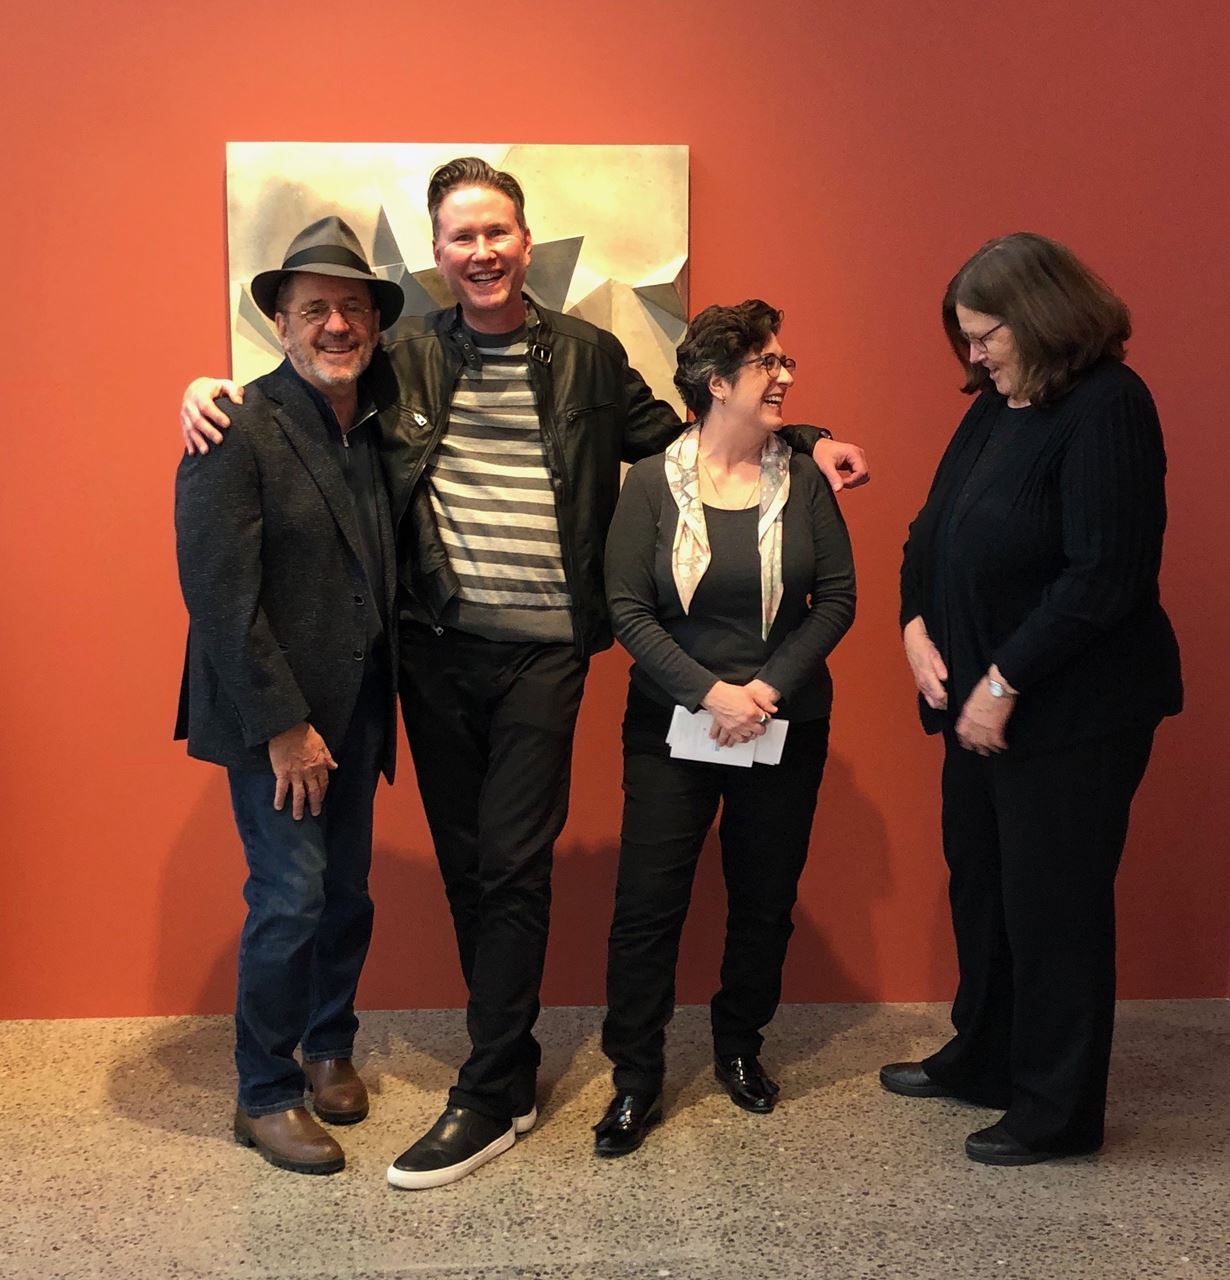 Wayne Higby,Director and Chief Curator, Alfred Ceramic Art Museum; Brian Whisenhunt, Executive Director Rockwell Museum of American Art and MANY Board Member; Erika Sanger, and Susan Kowalczyk, Curator of Collections and Director of Research, Alfred Ceramic Museum